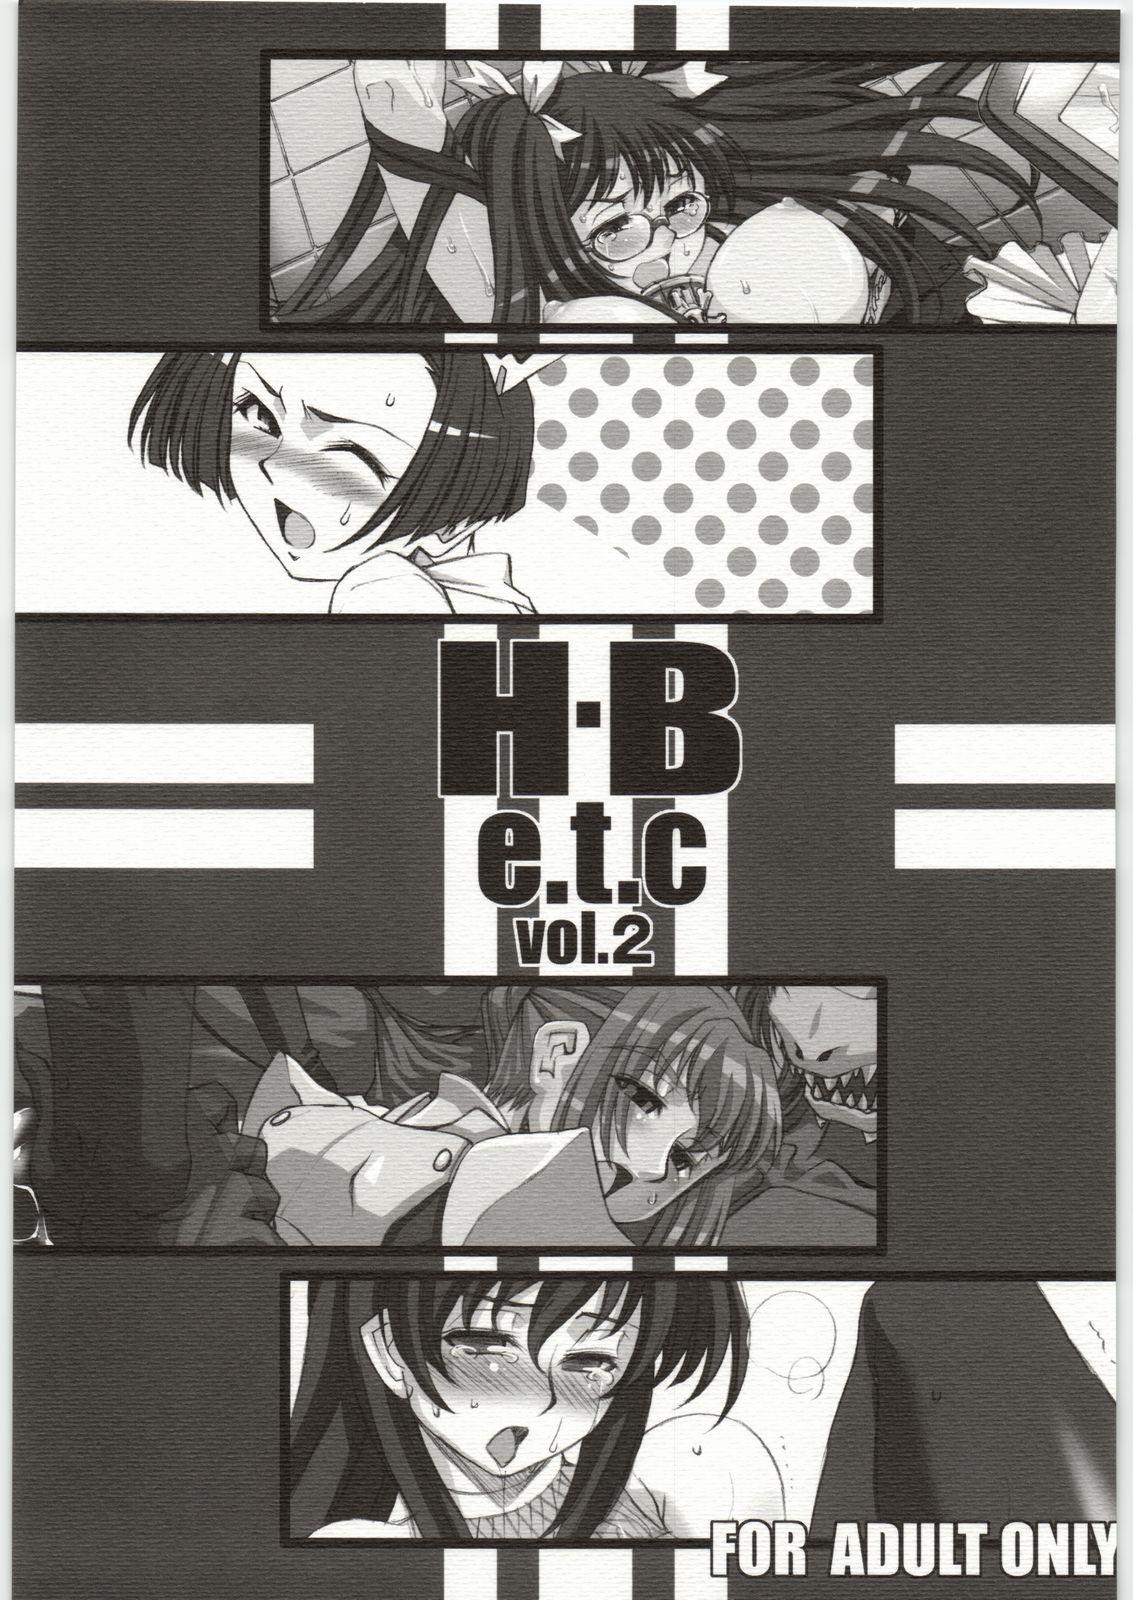 Tight H.B e.t.c vol.2 - Dragon quest Rance Tower of druaga Air gear Insertion - Picture 1